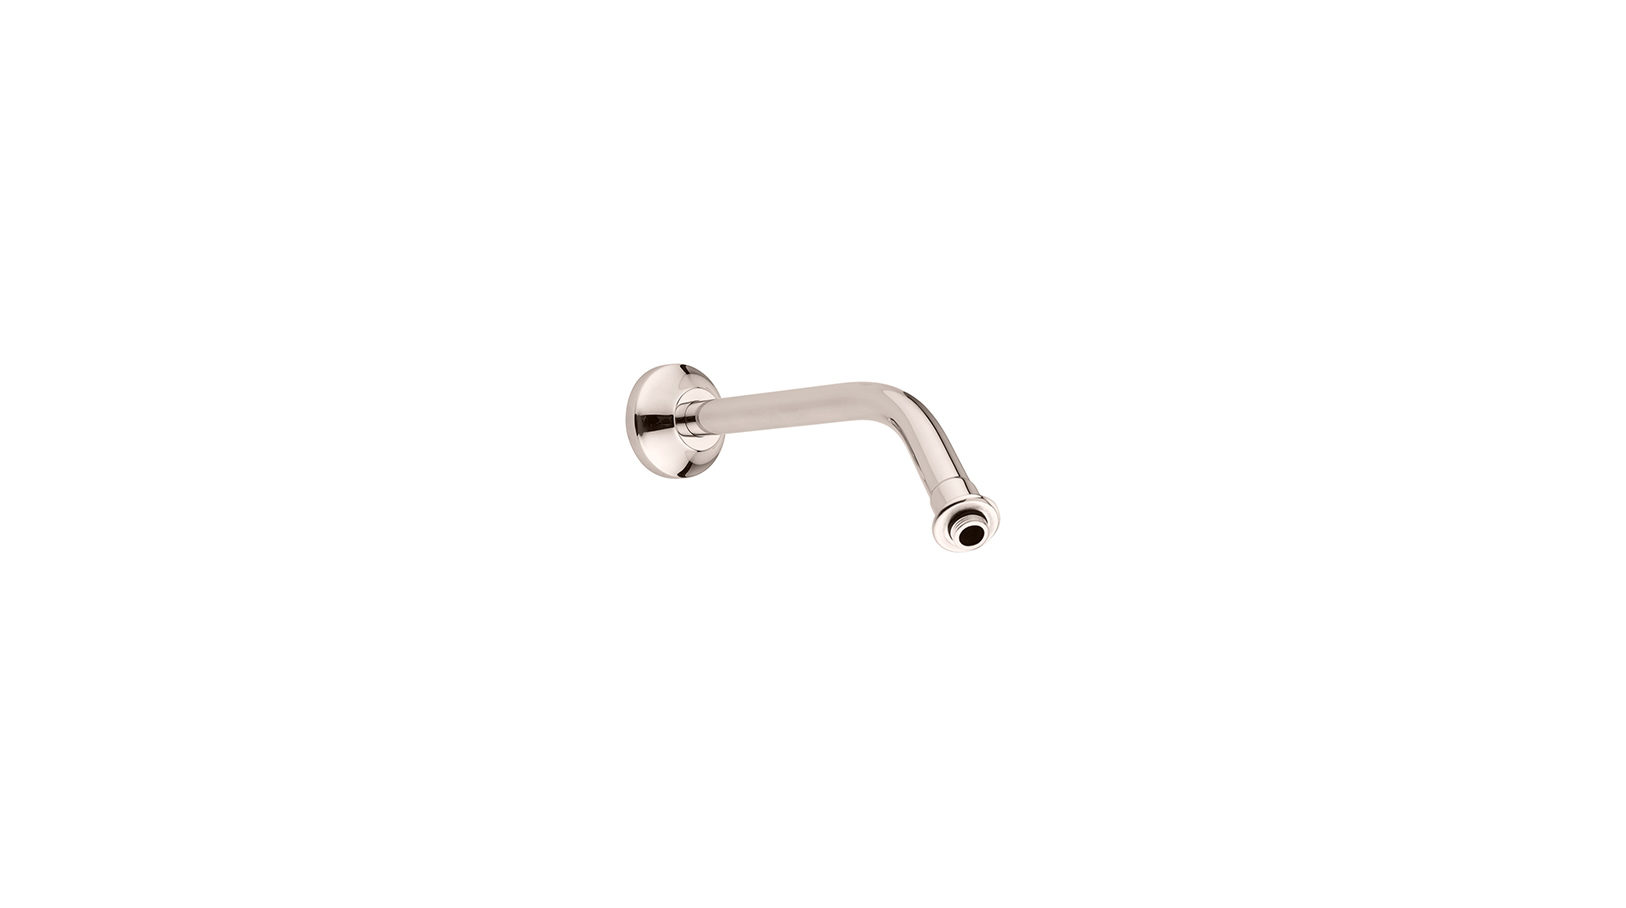 The Classic 45 Degree Shower Arm